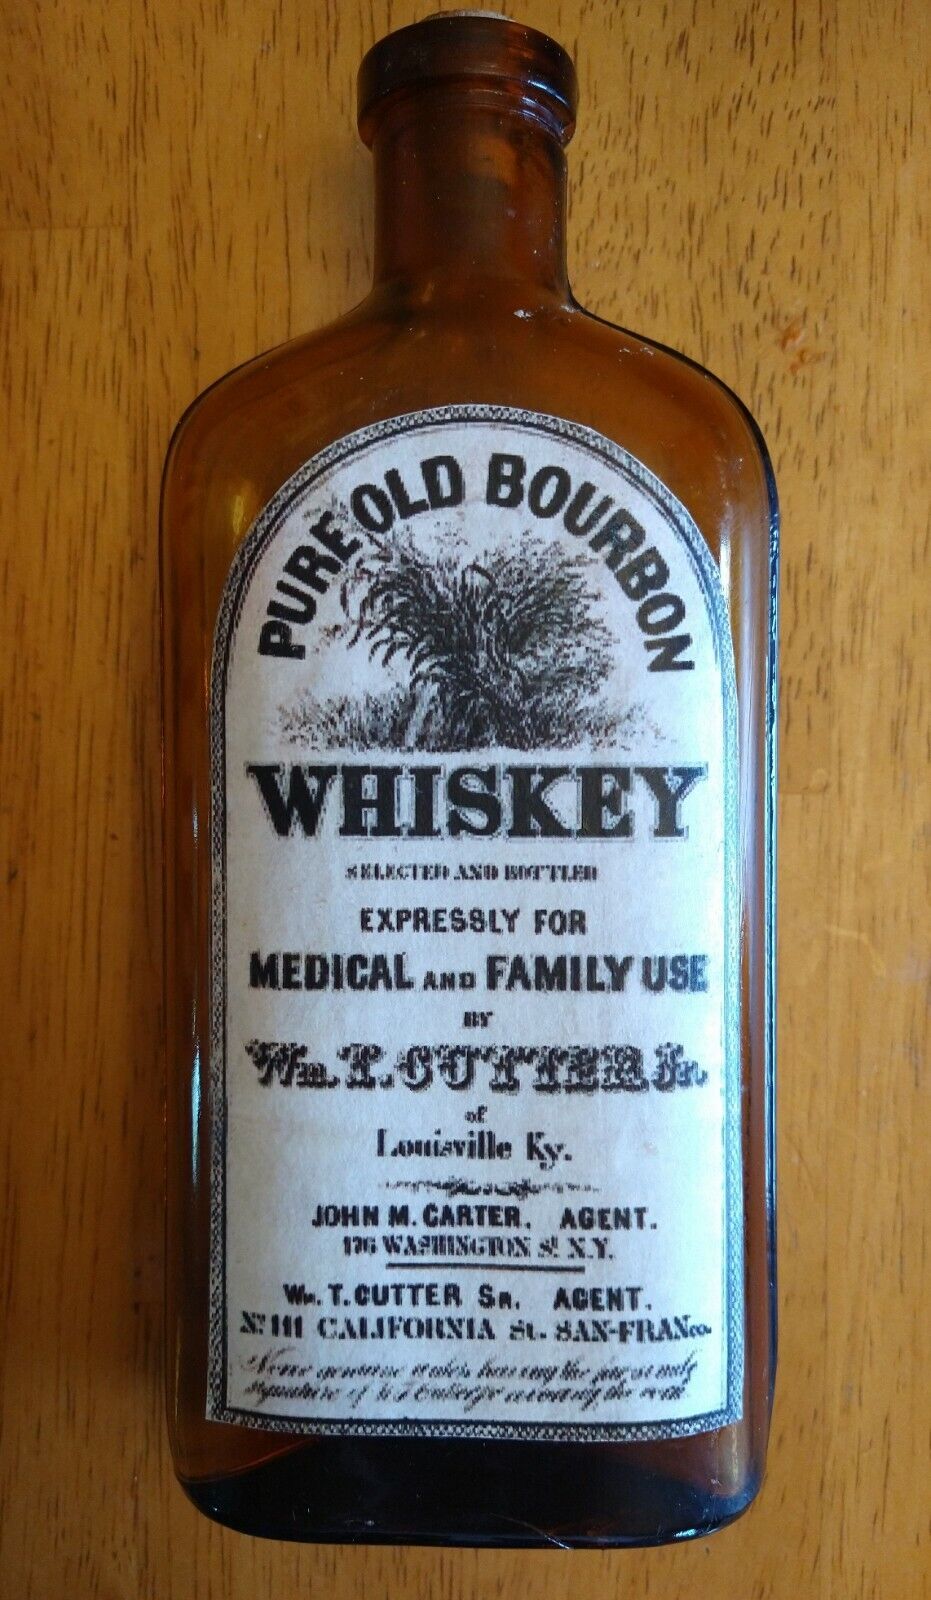 Vintage Family Medicine Hand Crafted Bottles,Cannabis,Medical Whiskey,Macalister Без бренда - фотография #4